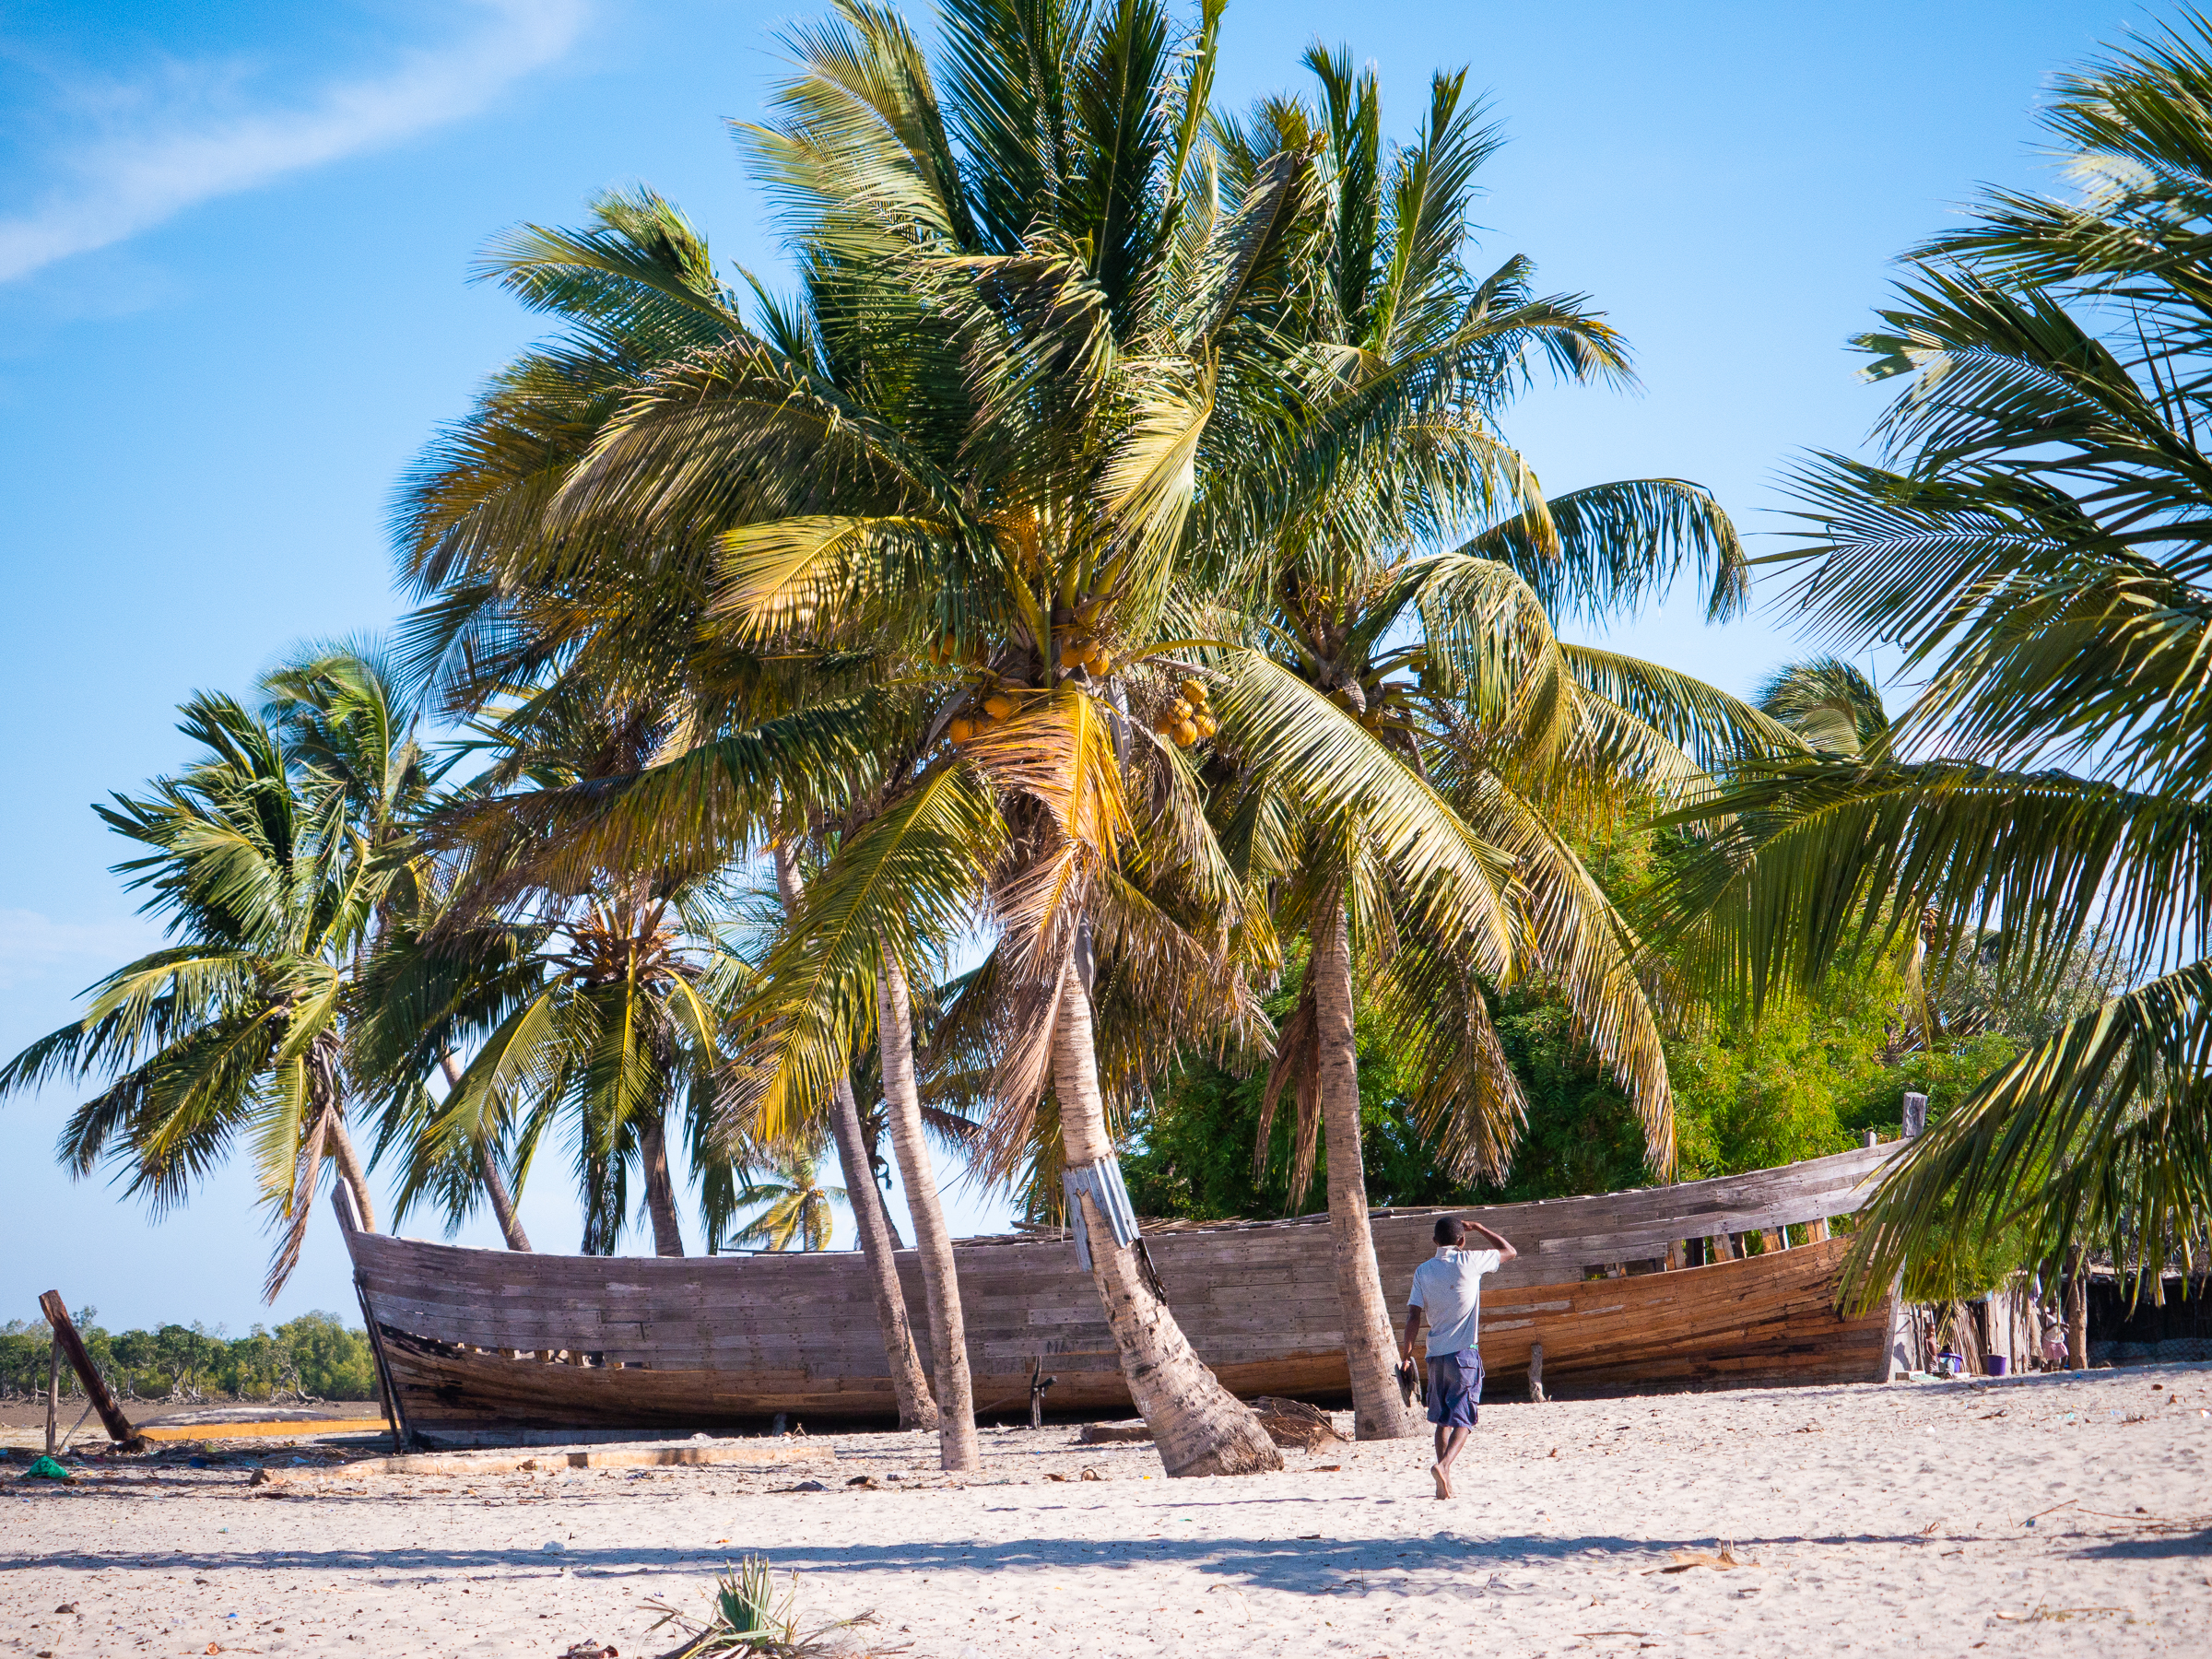 Palm trees on beach in Betany, Morondava